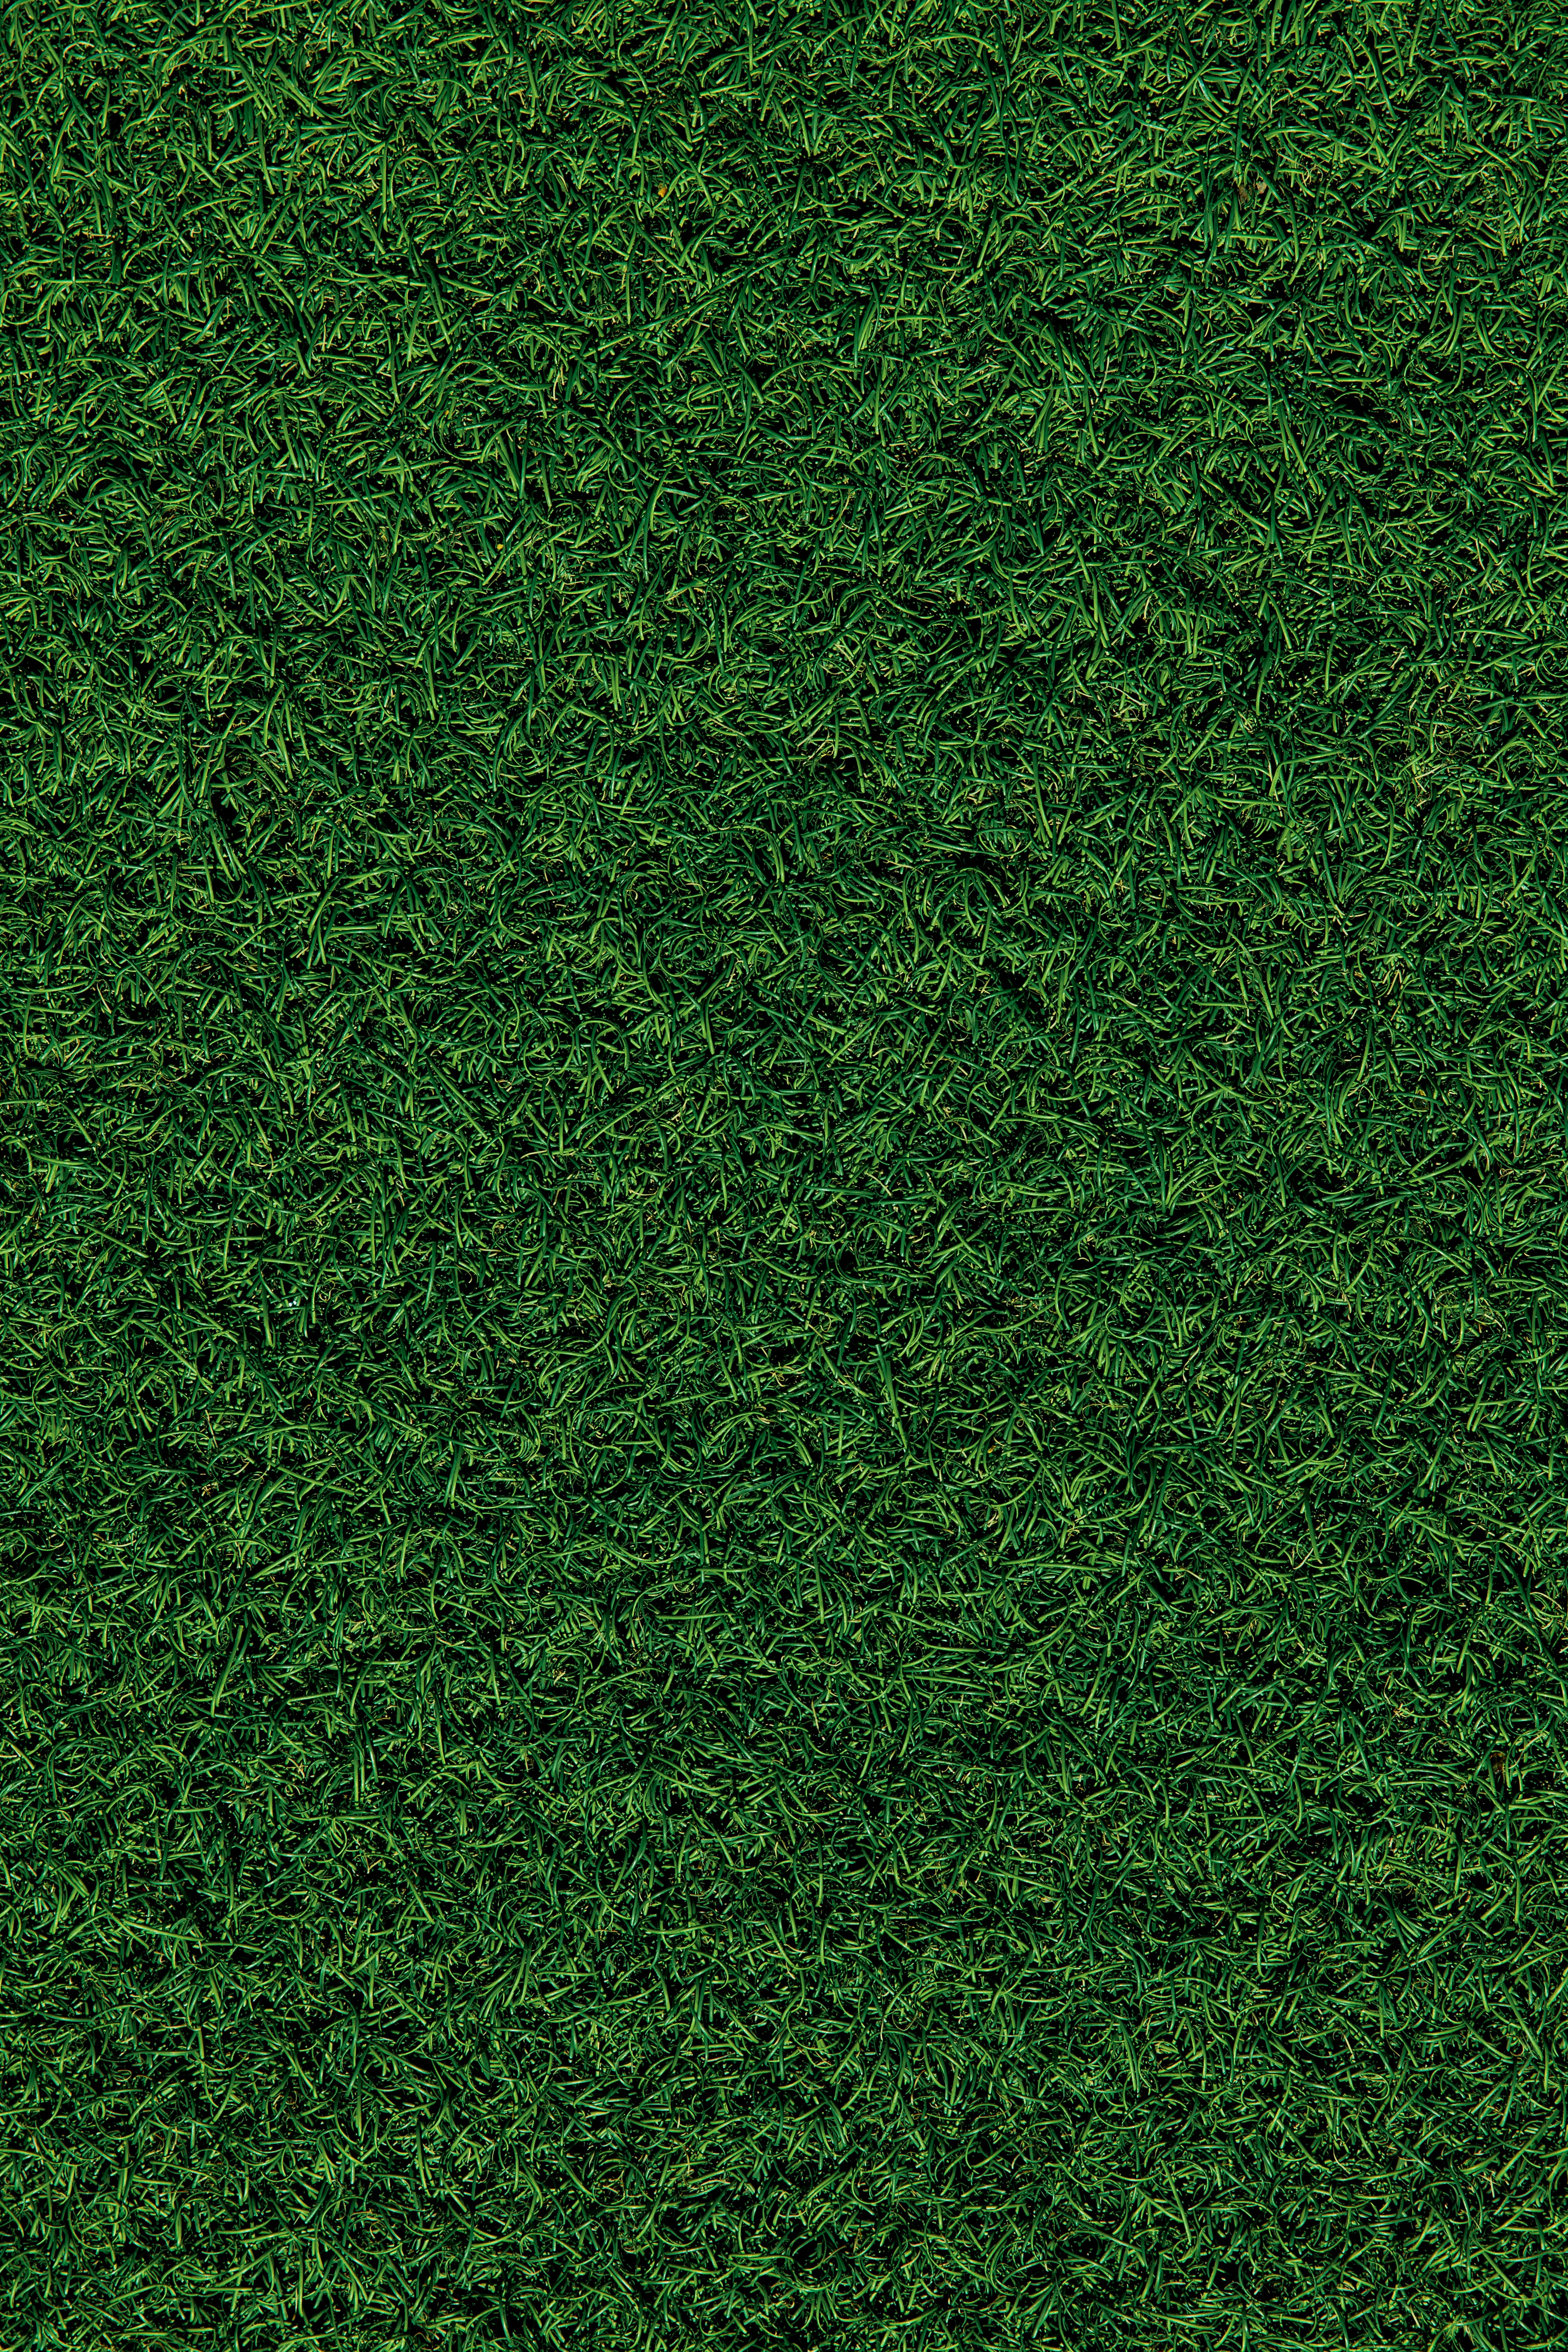 green, nature, covering, grass, field, coating